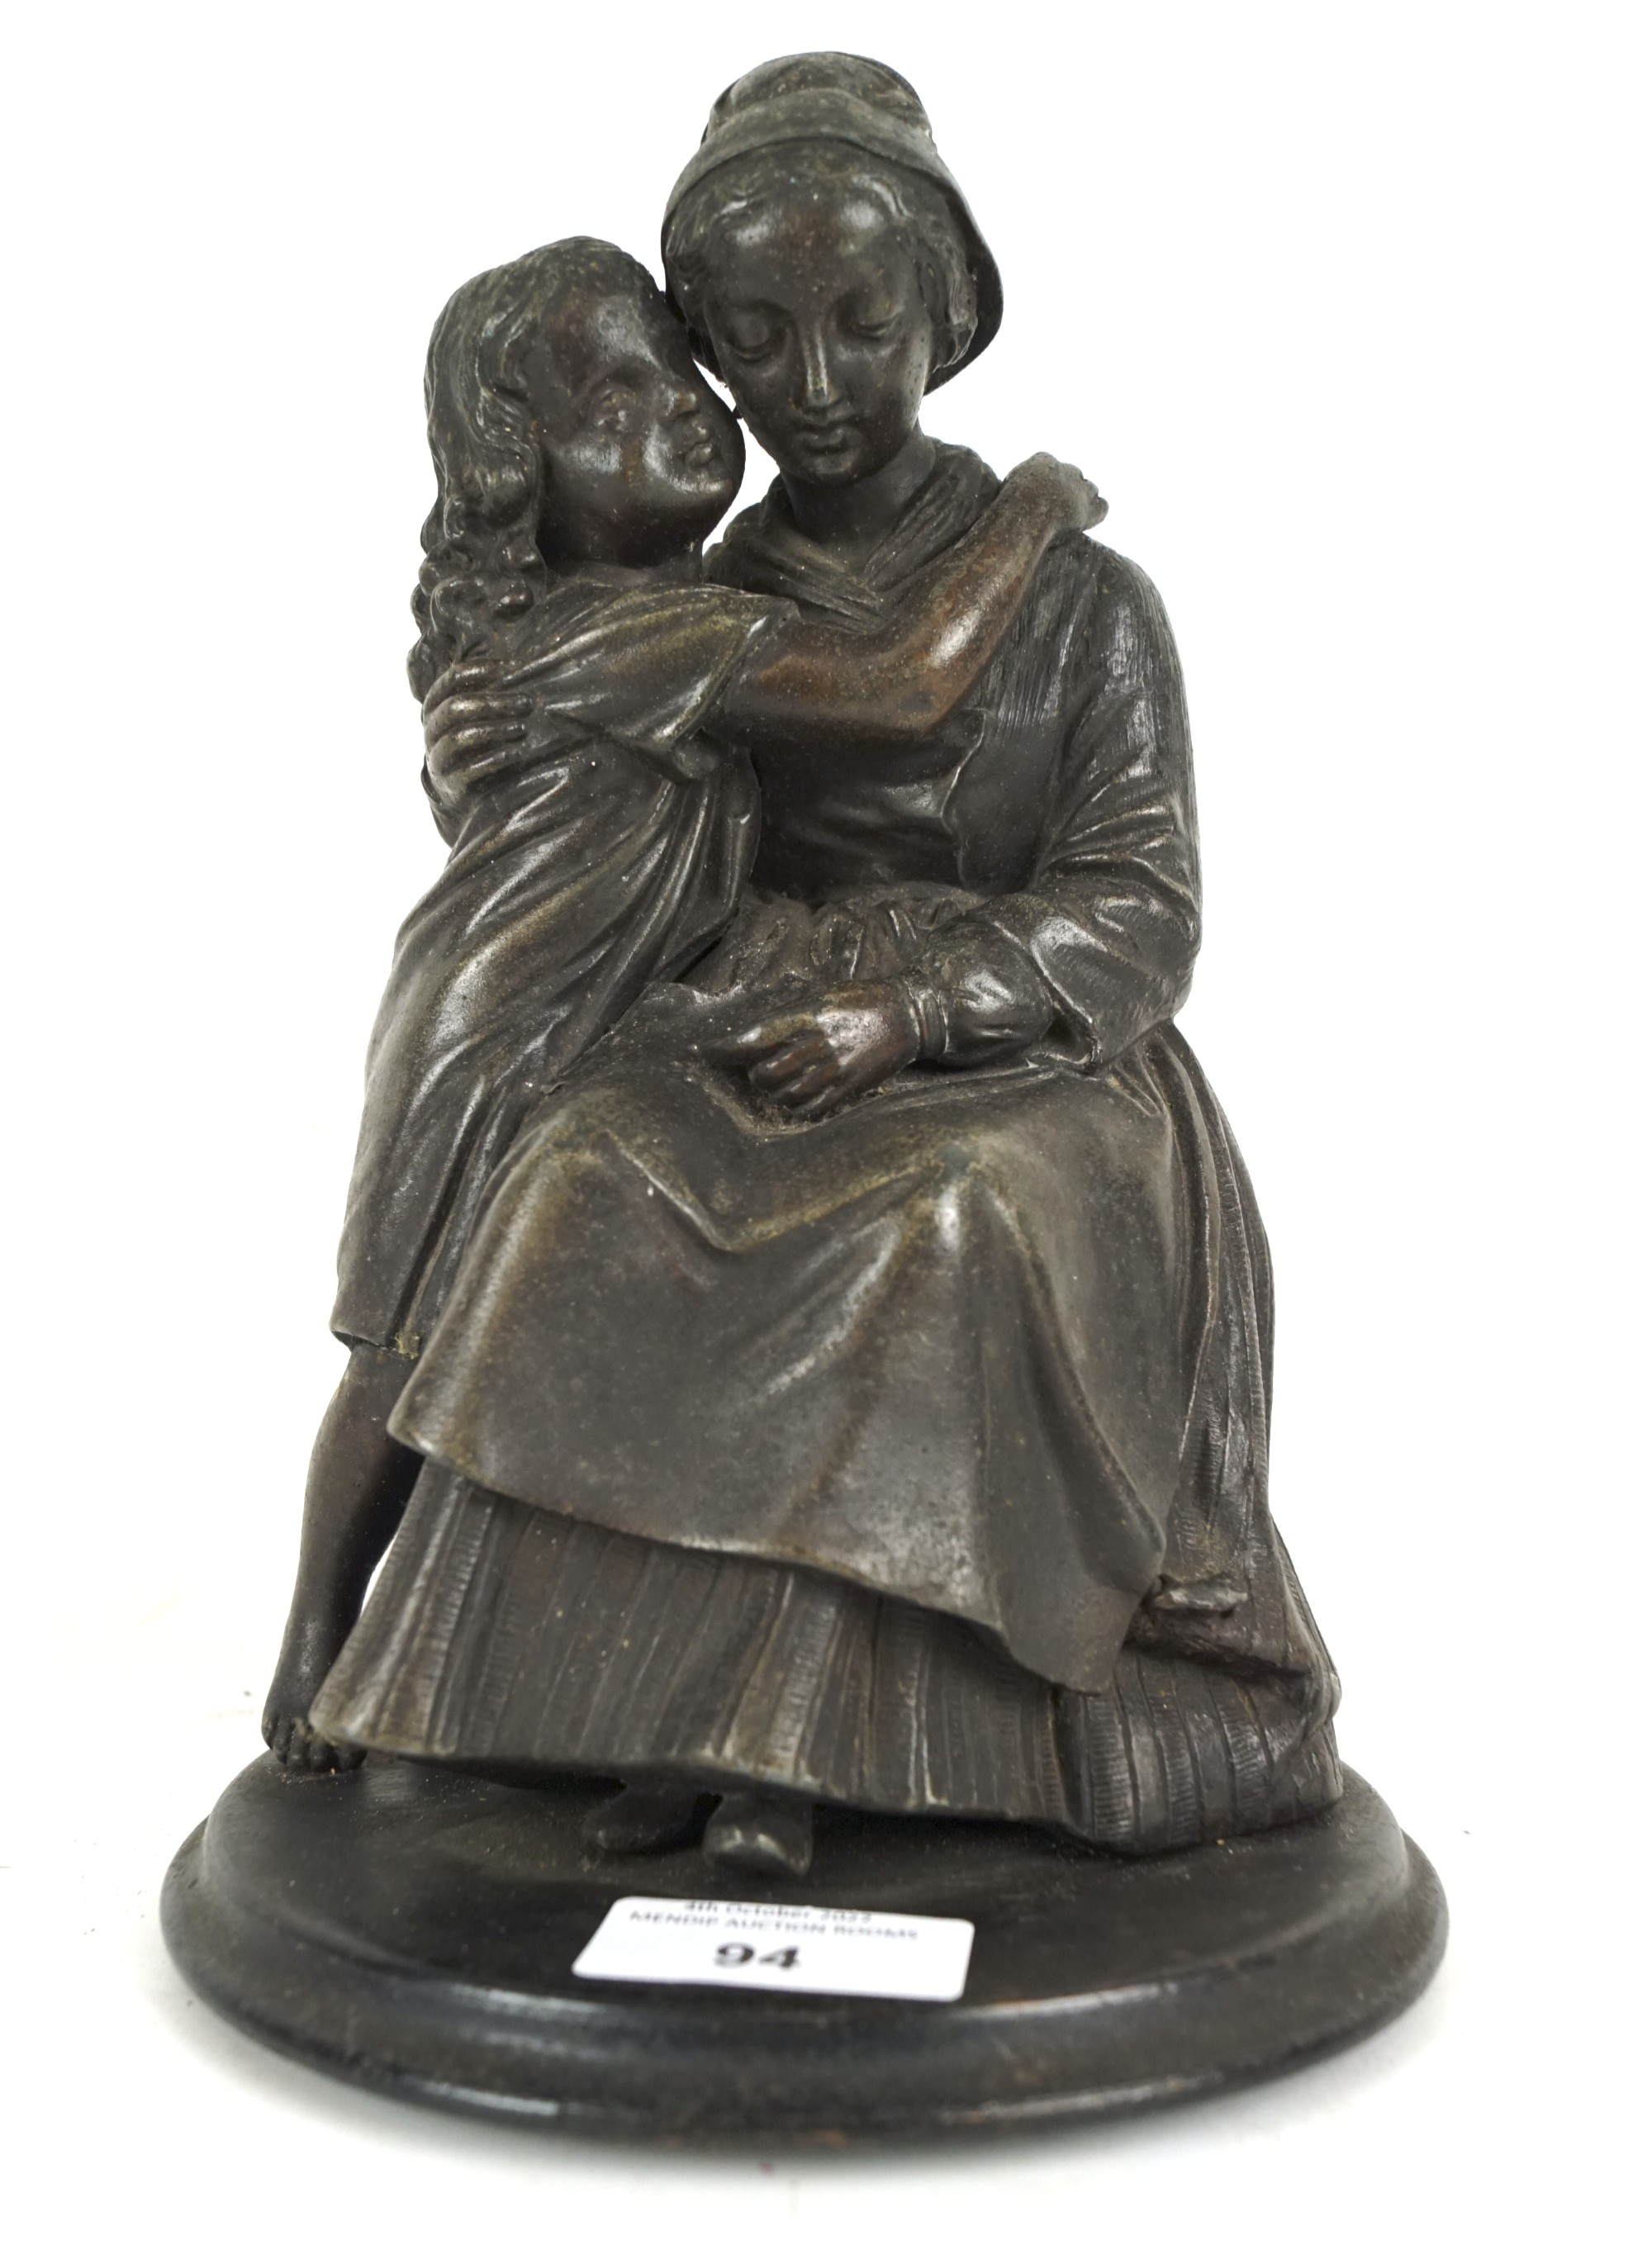 A 20th century spelter figure depicting a mother and child.